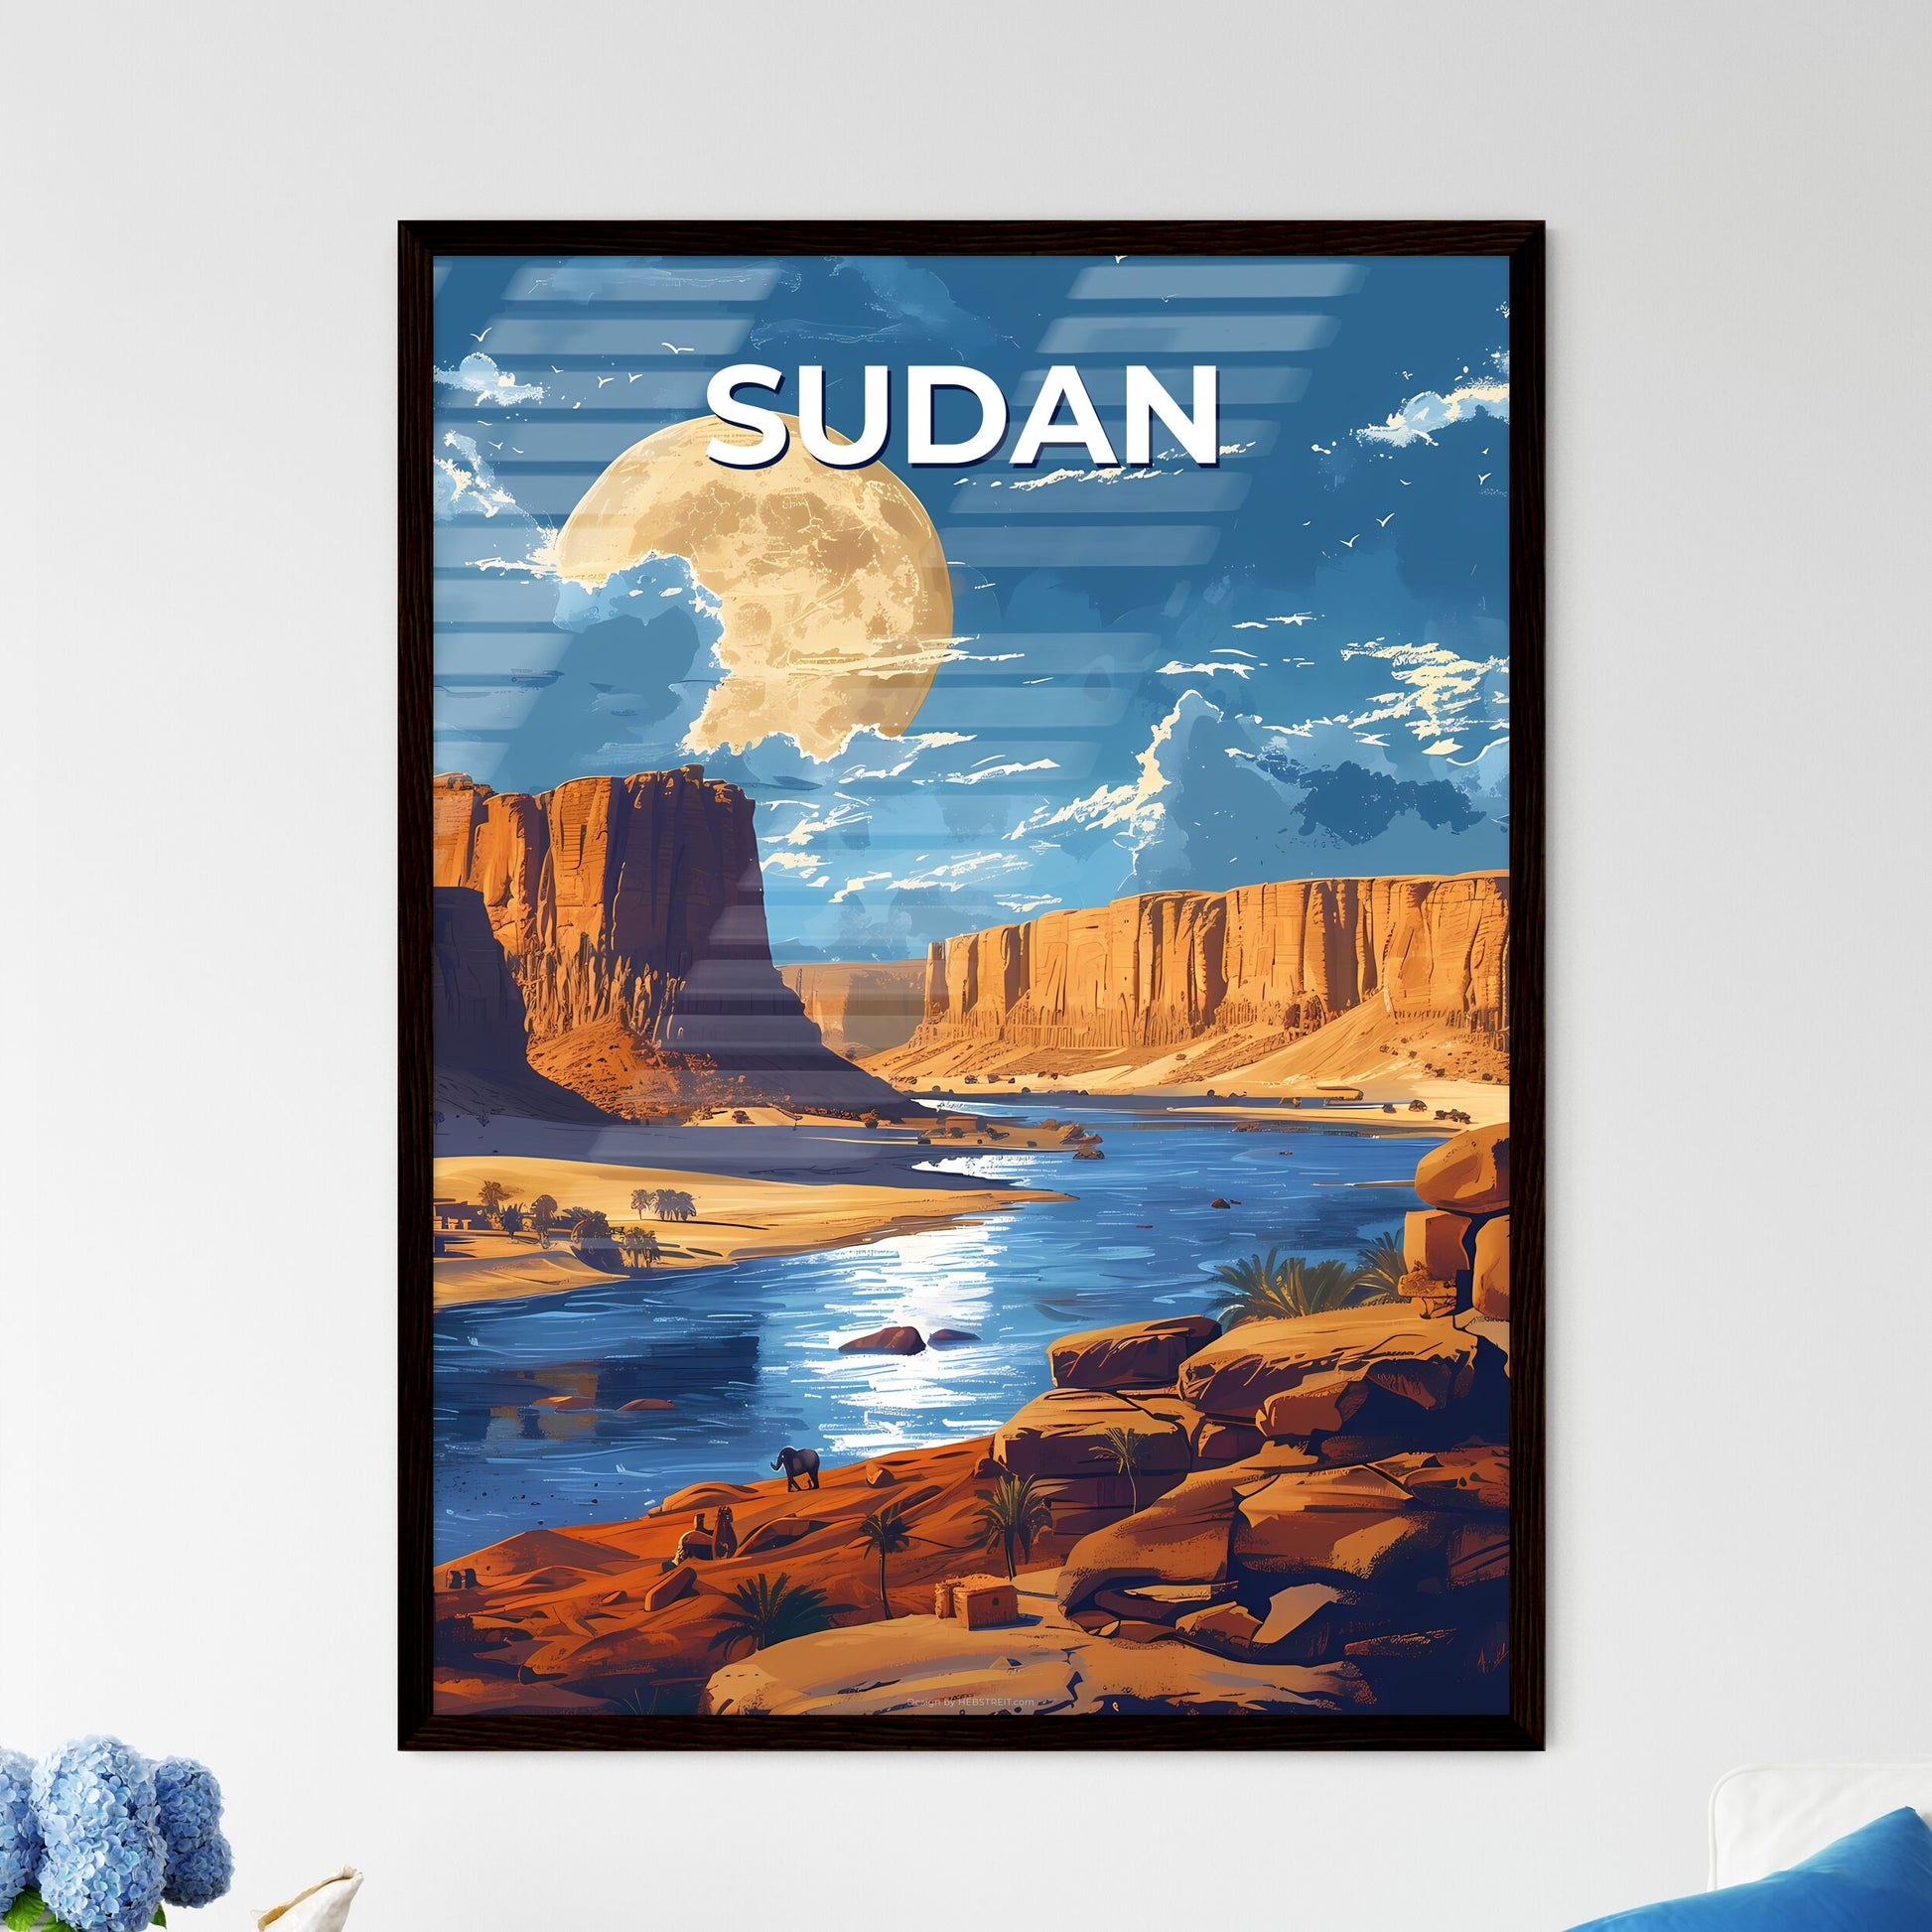 Abstract Painting Depicting Serene River Flowing Through Canyon in Sudan, Africa